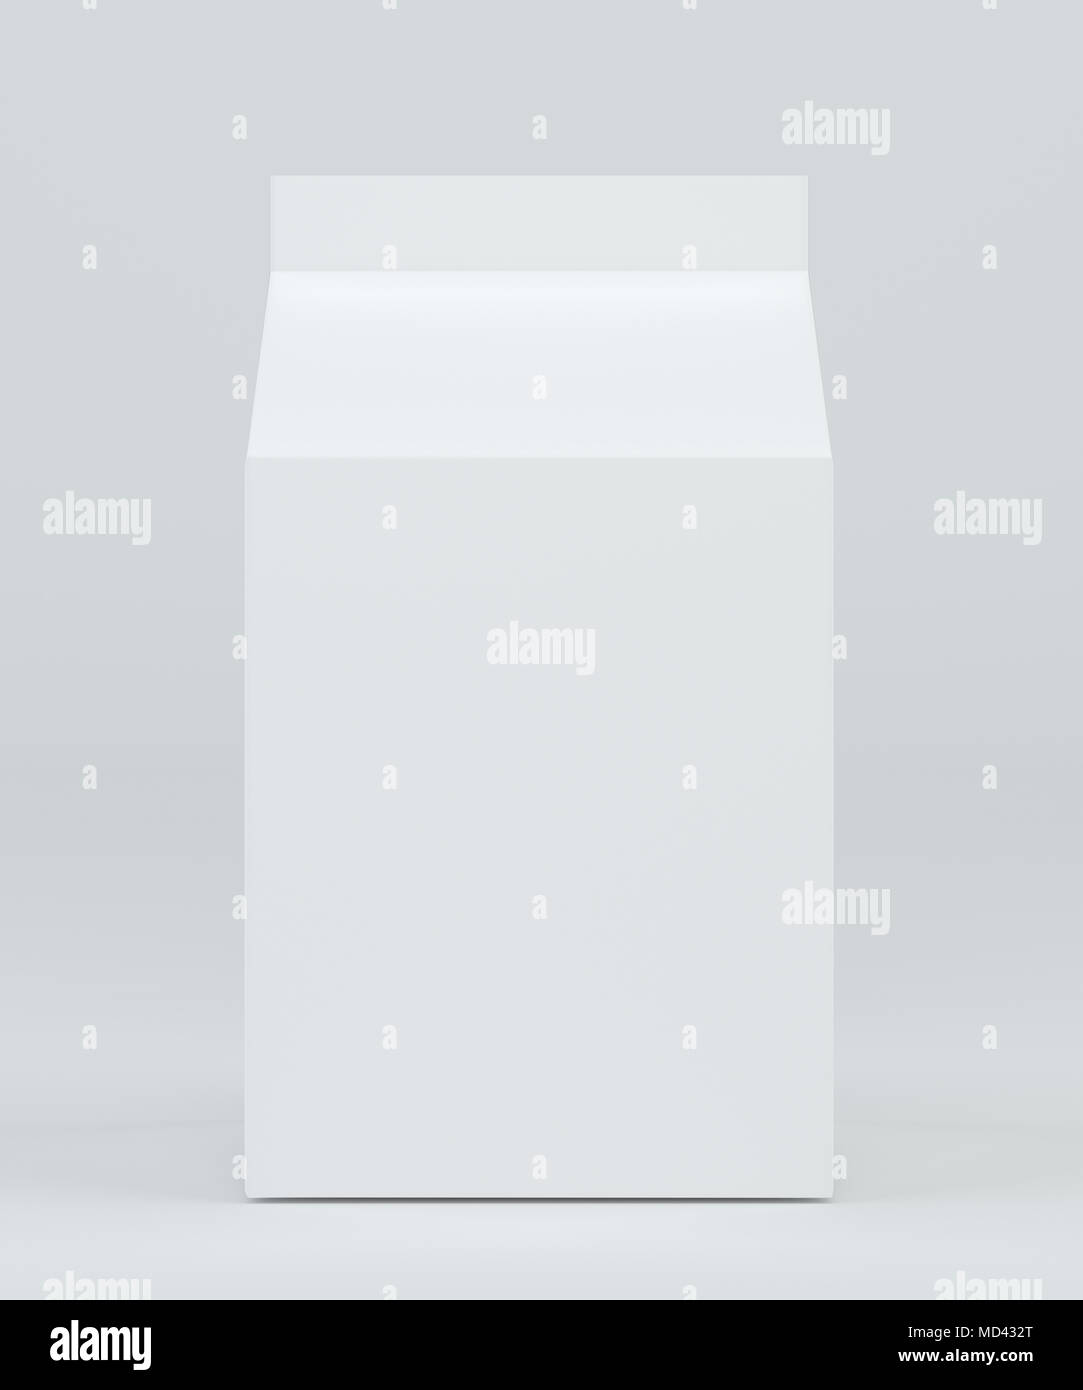 Download Milk Box Front View Carton Box Mock Up White Clear Empty Box 3d Rendering Stock Photo Alamy